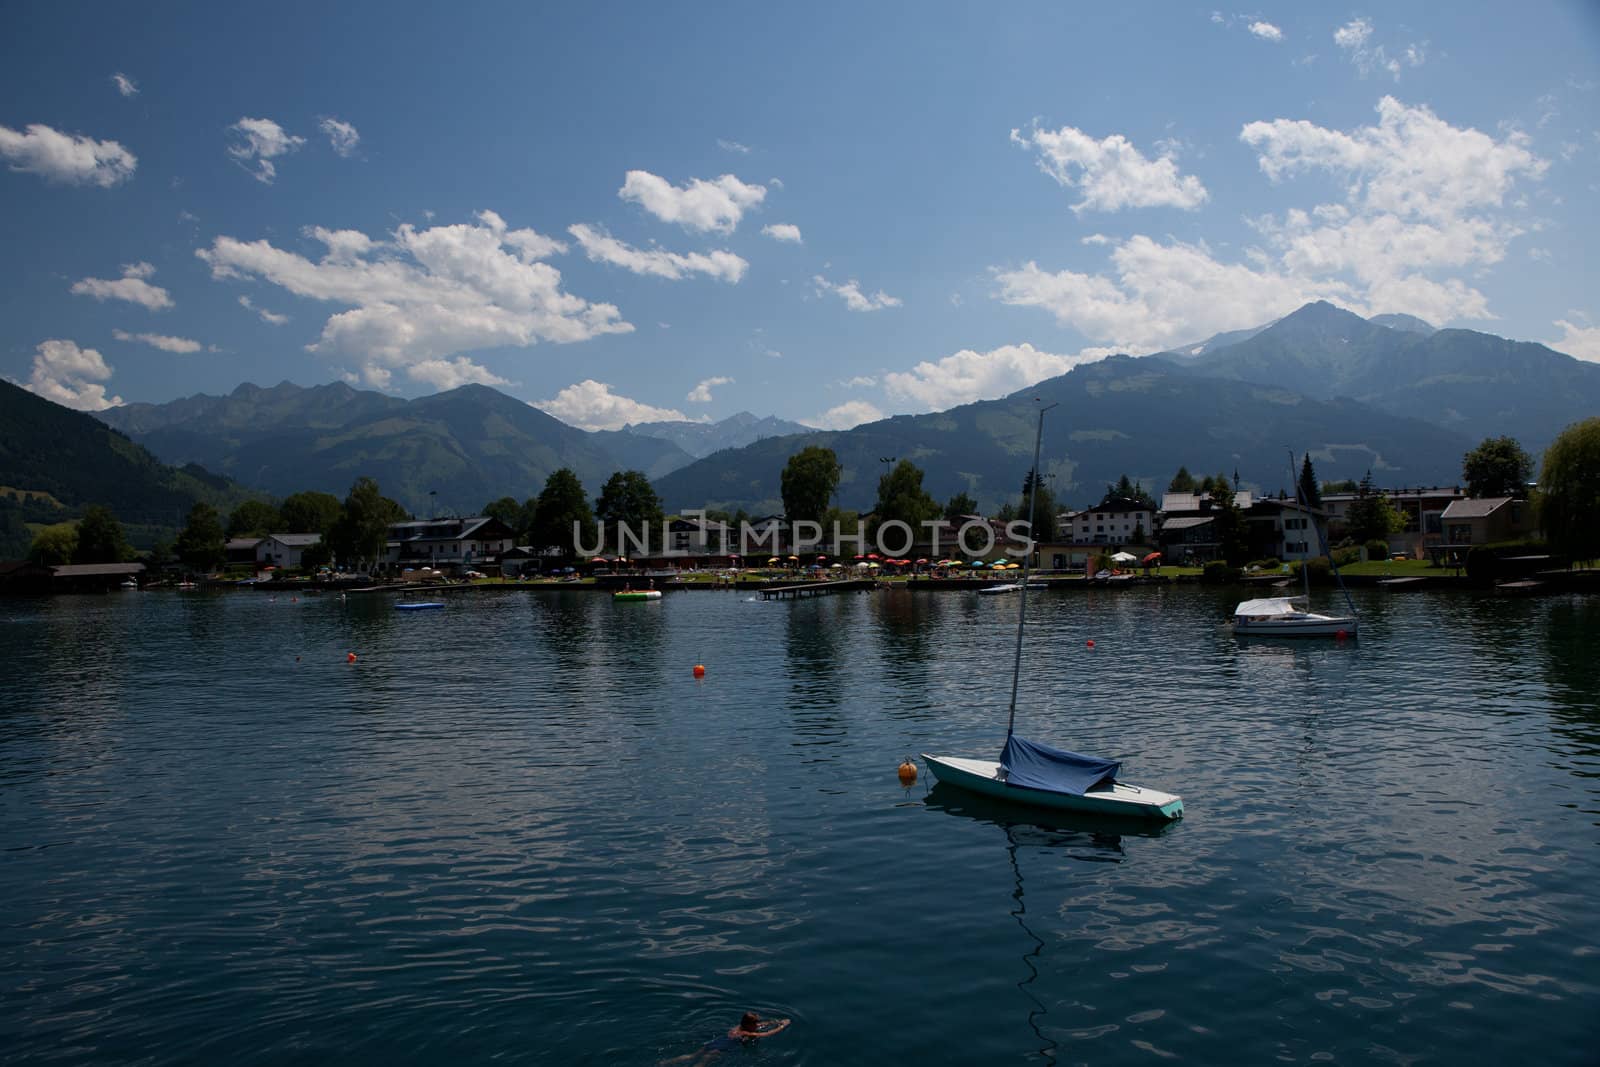 Image taken from the lake in Zell Am See. A beautiful landscape in the Alps in Austria